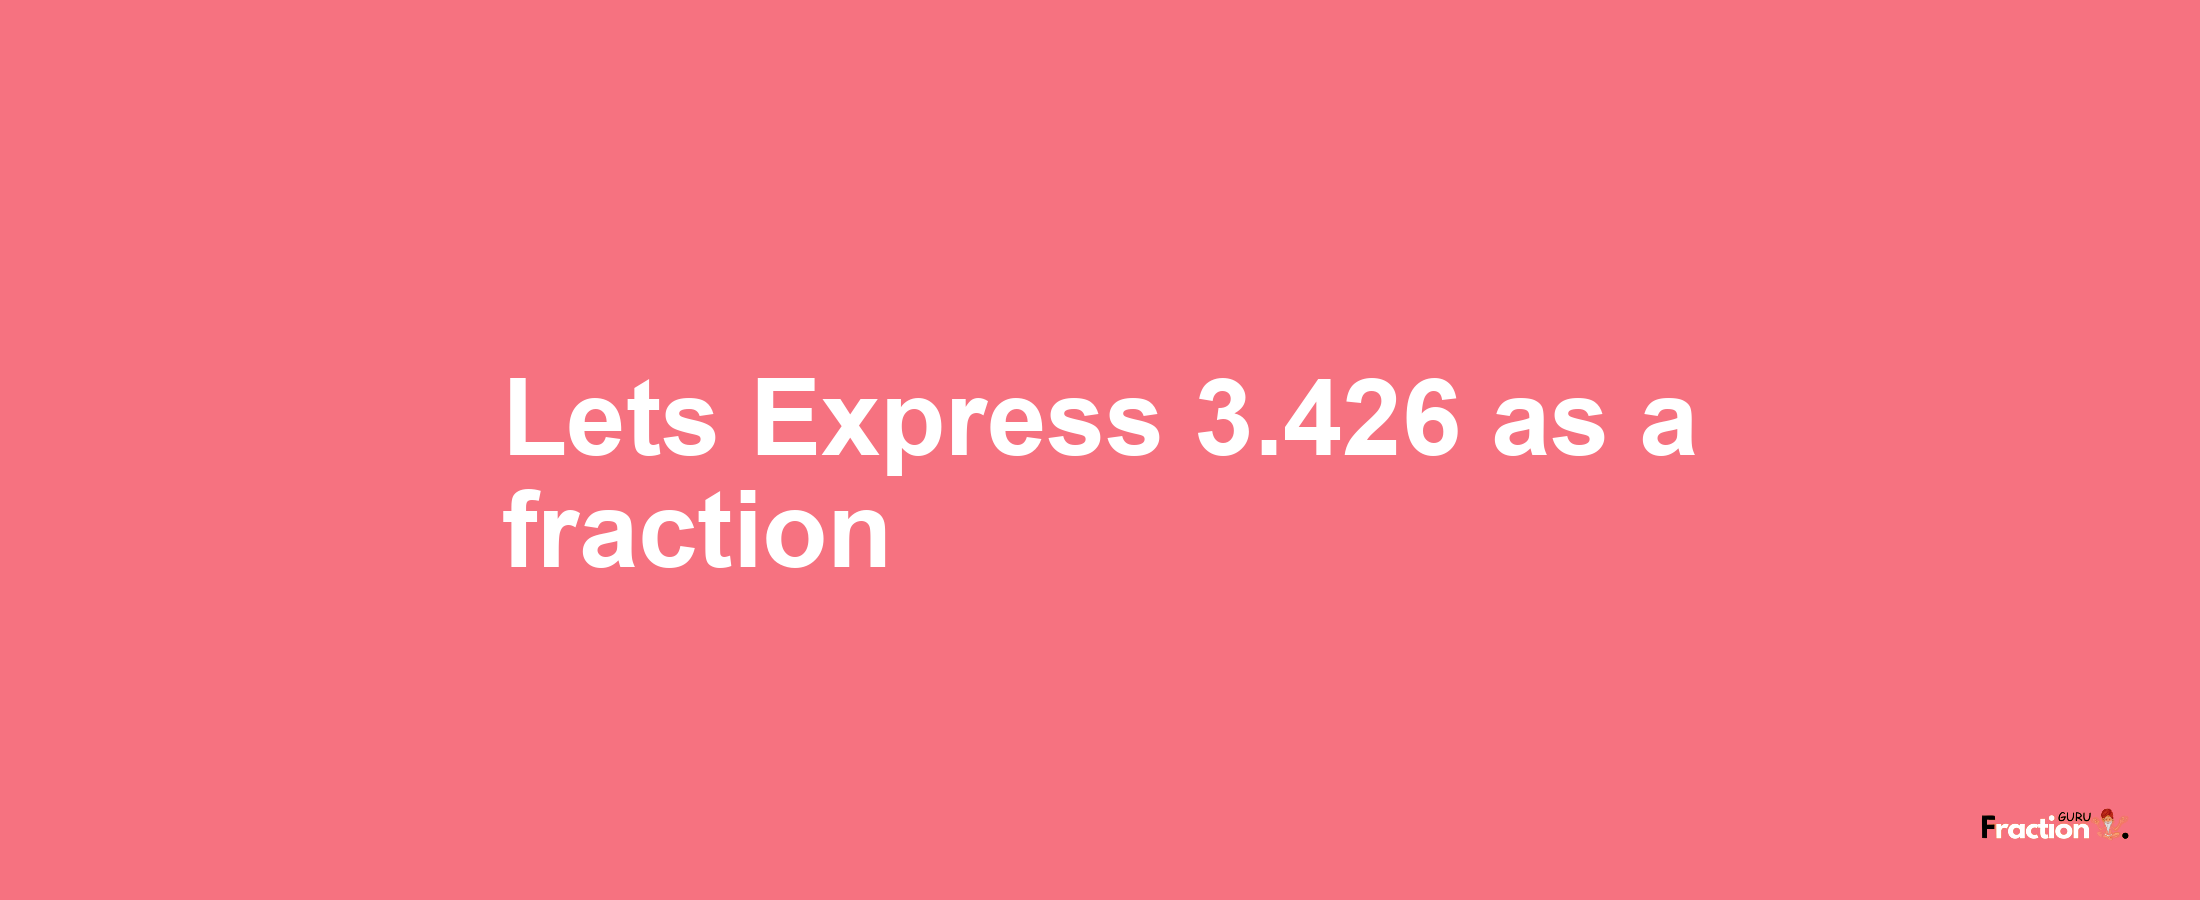 Lets Express 3.426 as afraction